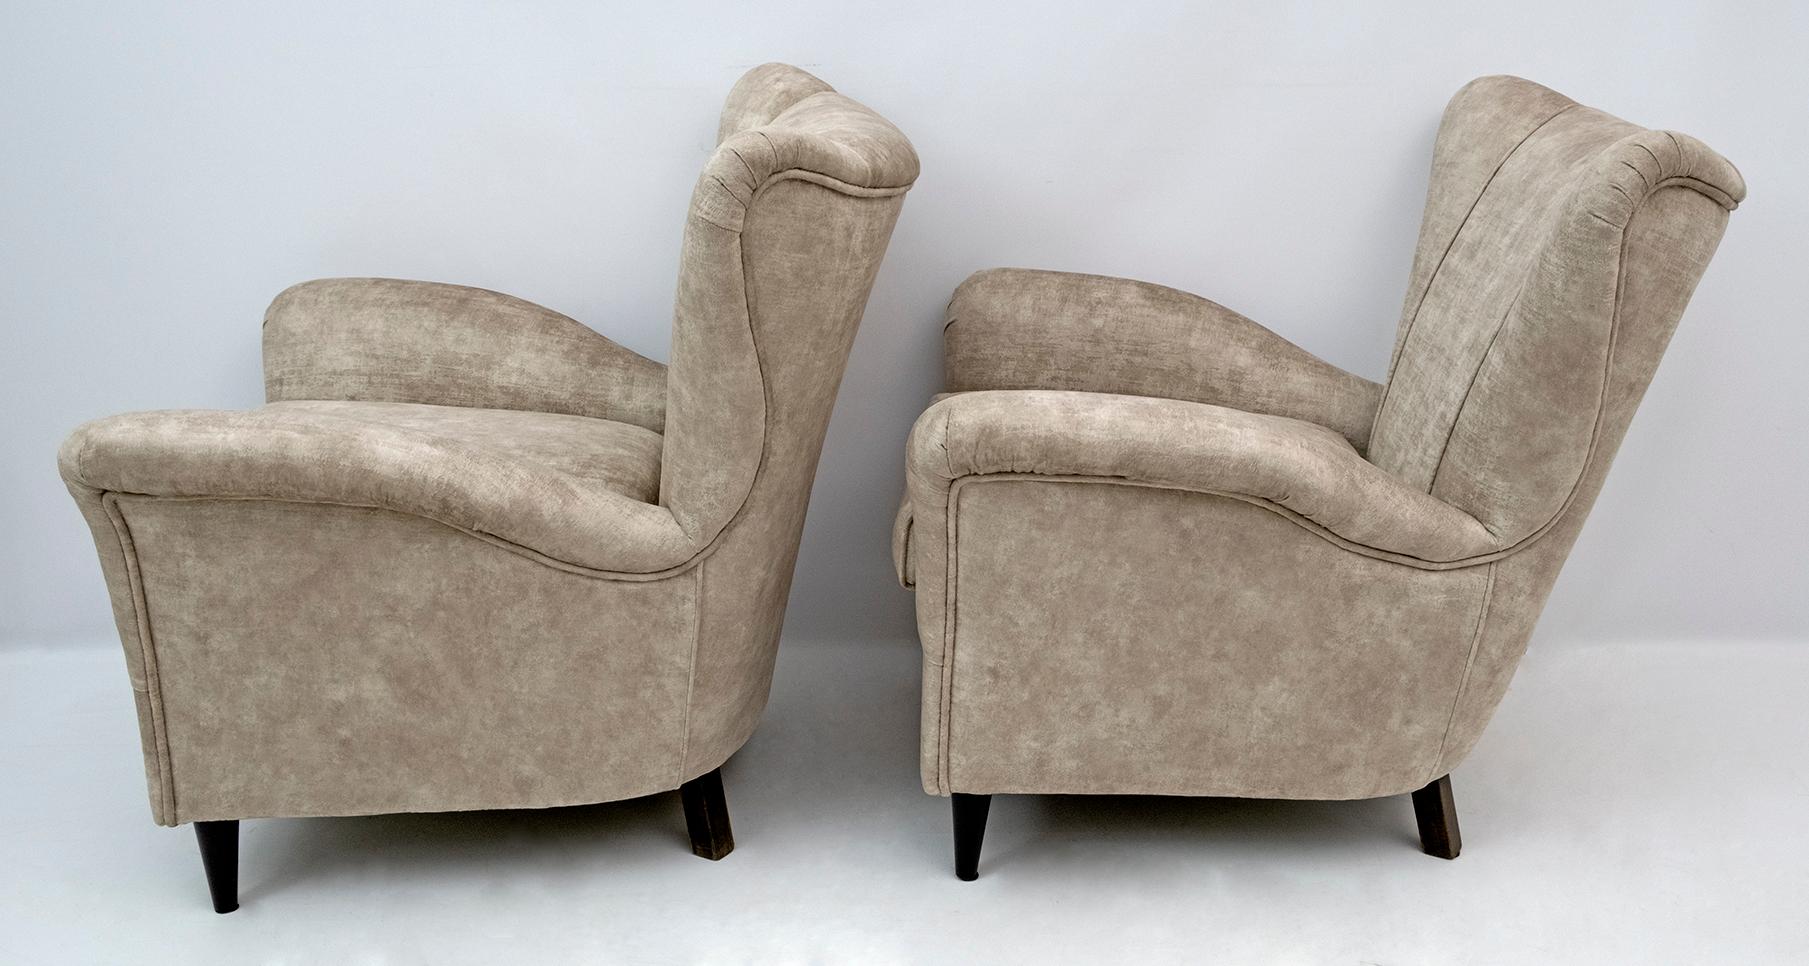 Attributed Gio Ponti Mid-Century Modern Italian Velvet Armchairs for ISA, Pair For Sale 4